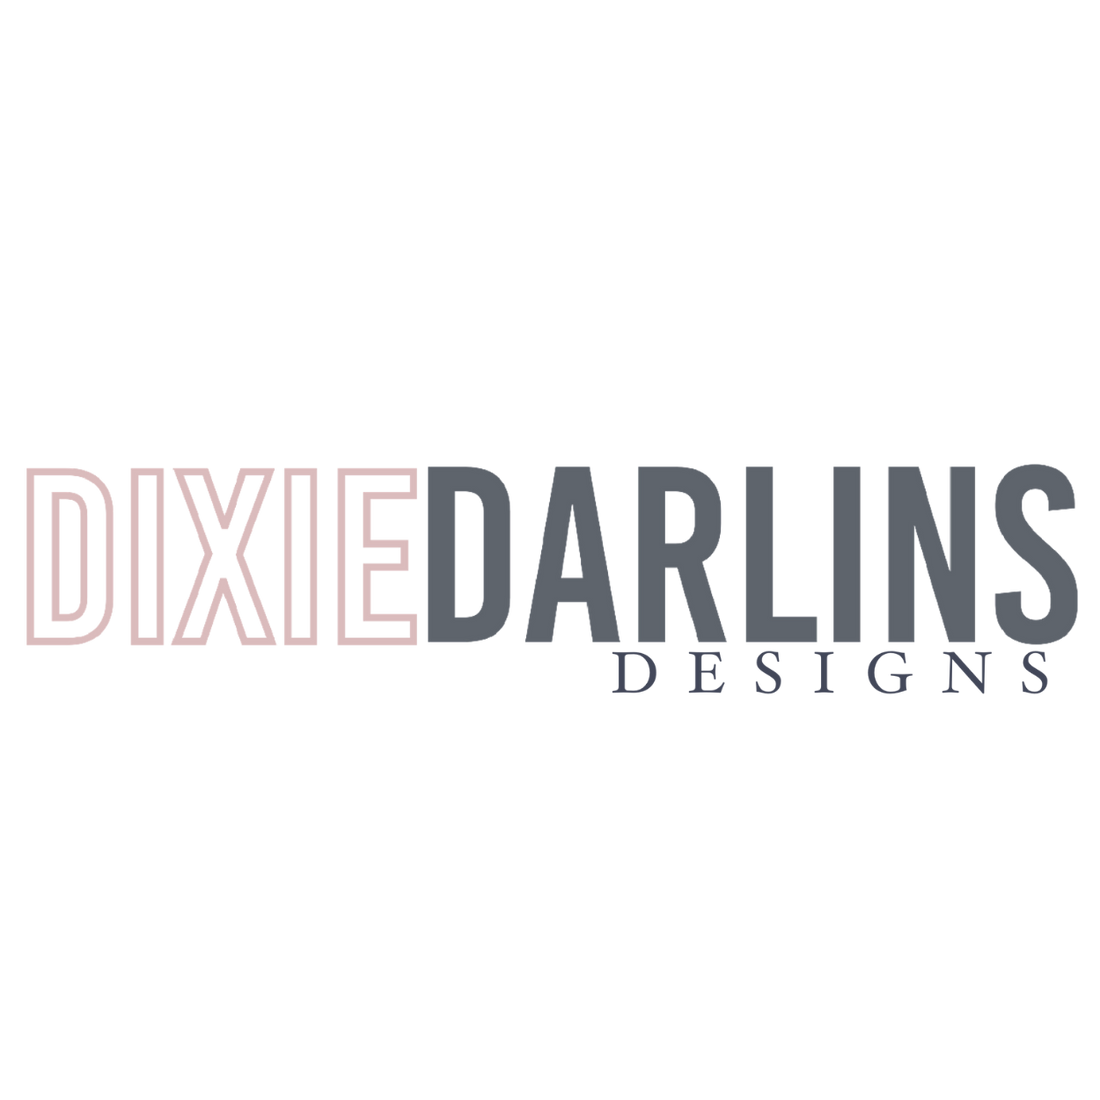 Welcome to Dixie Darlins